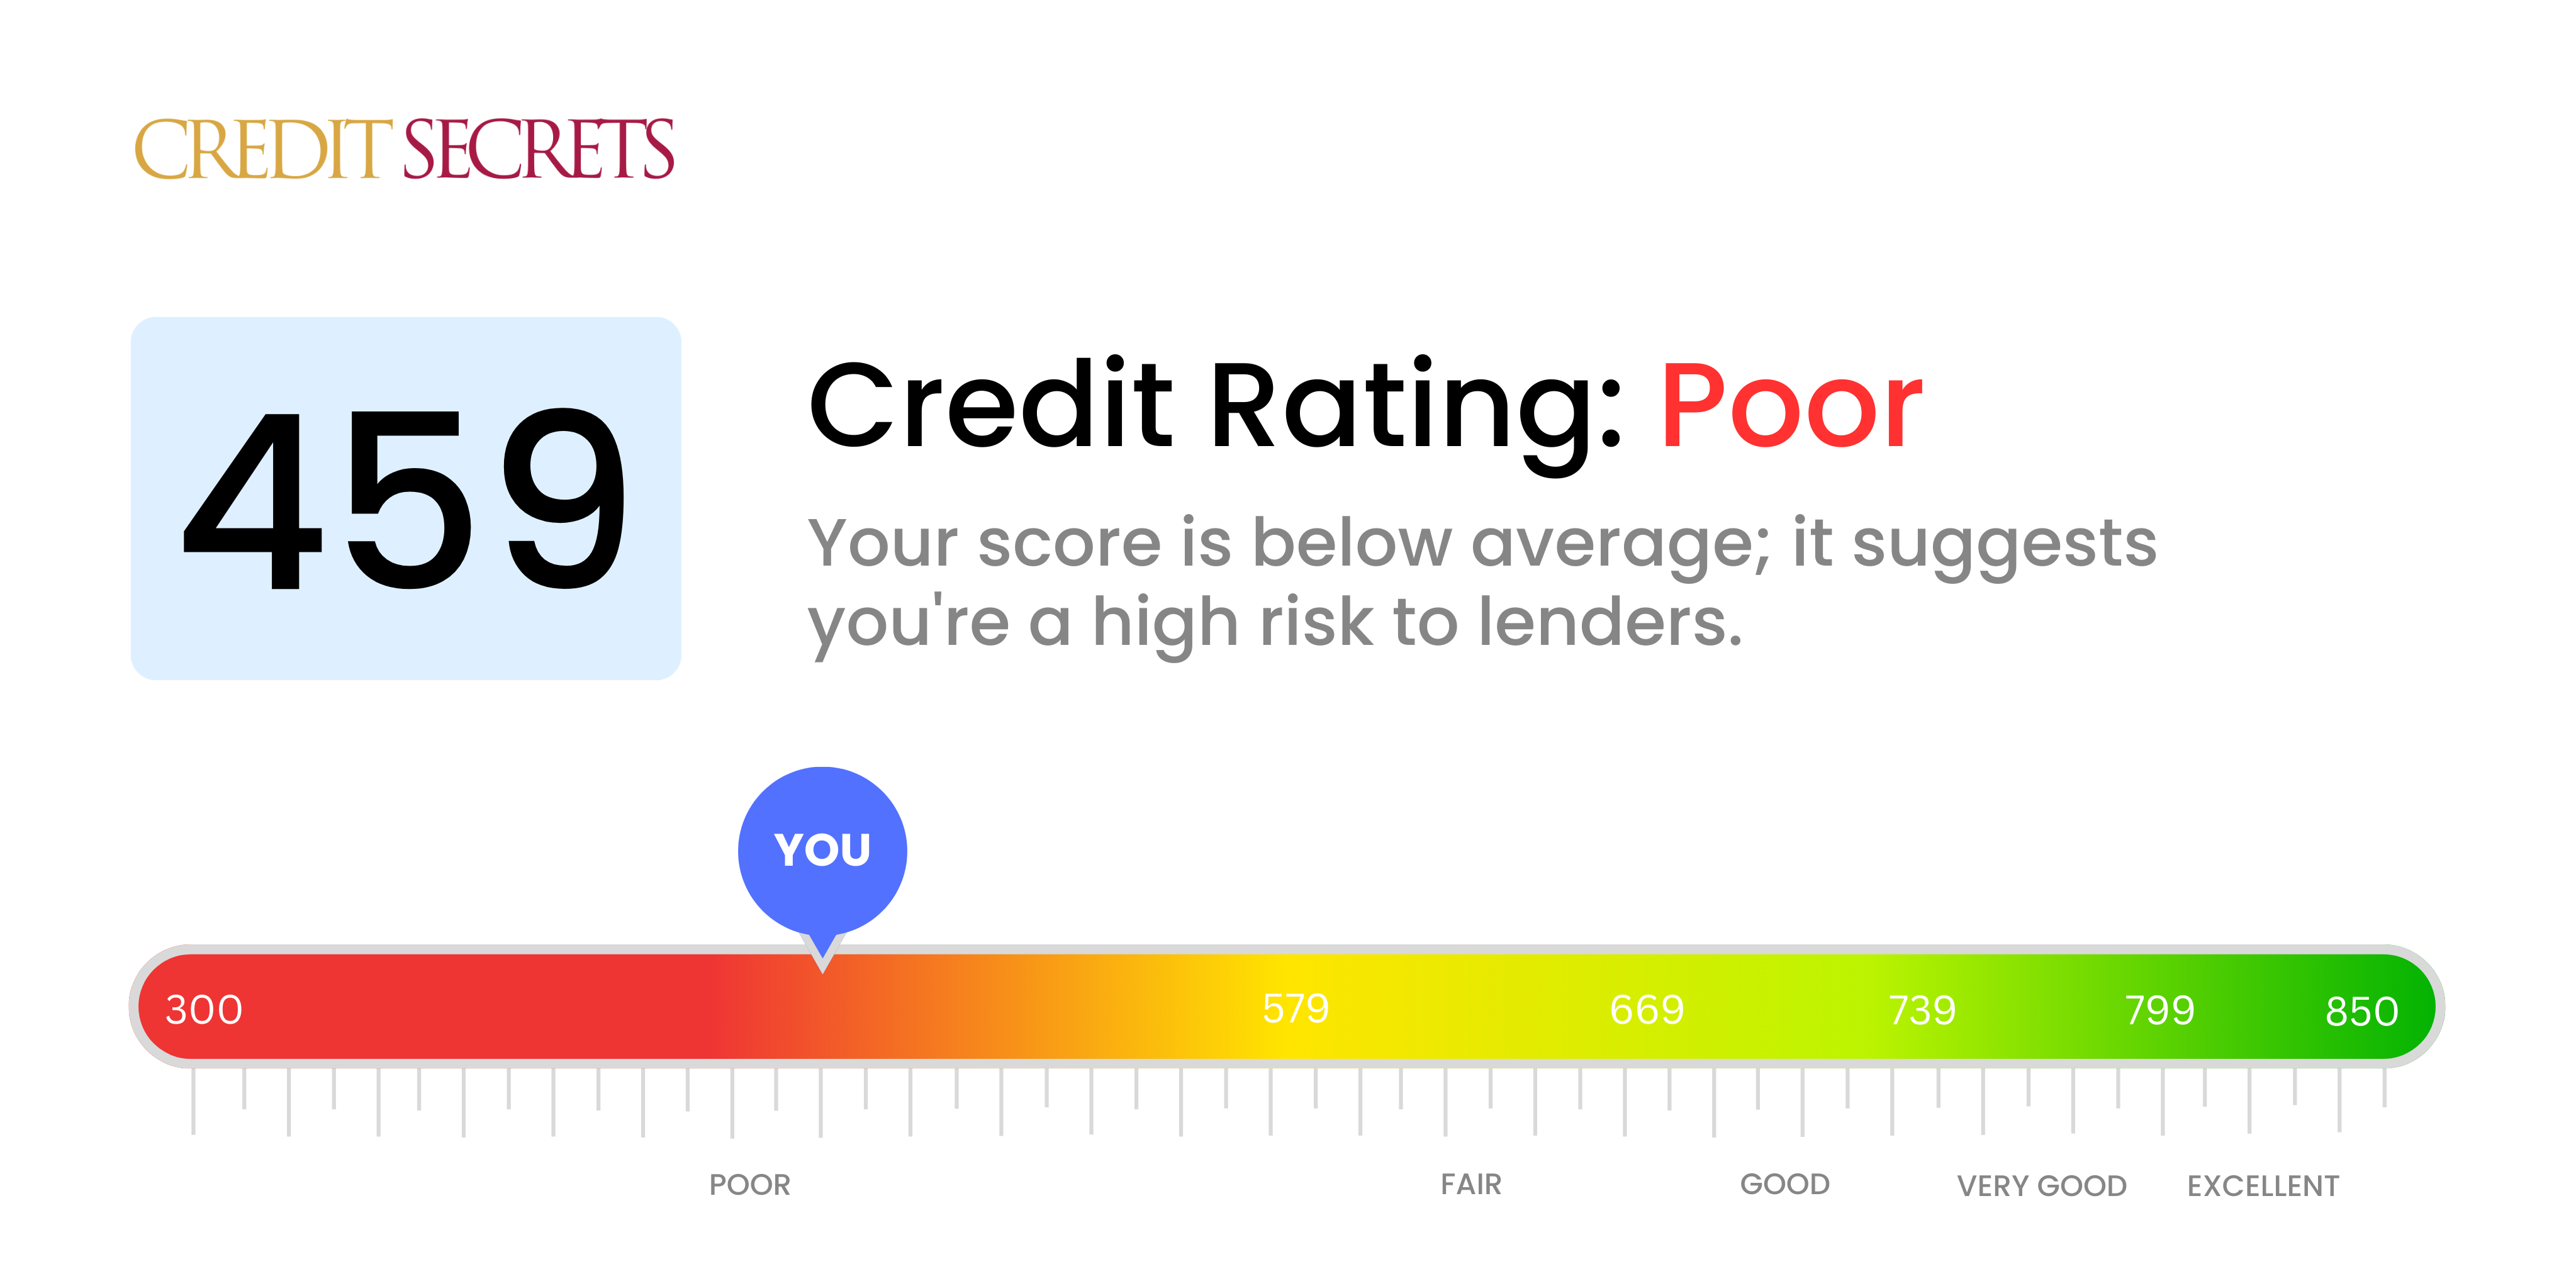 Is 459 a good credit score?